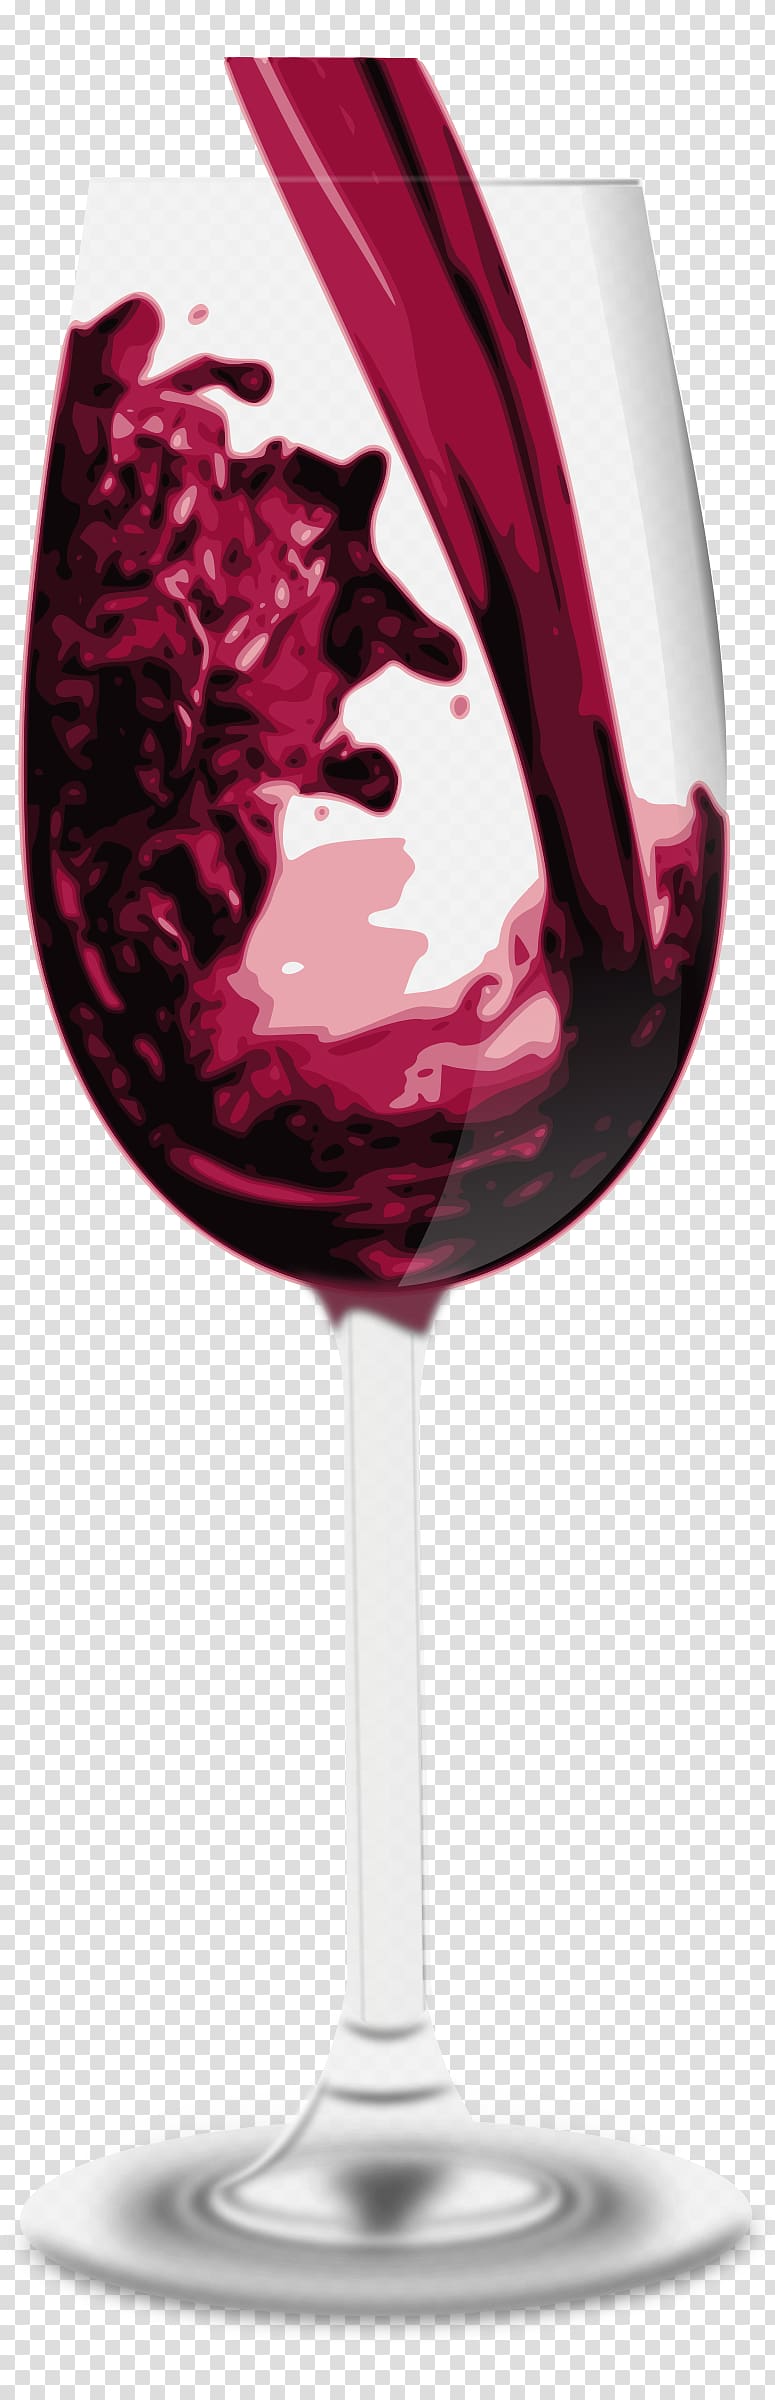 Red Wine White wine Beer Wine Making 101: The Ultimate Guide to Making Delicious Wine at Home, wine glass transparent background PNG clipart